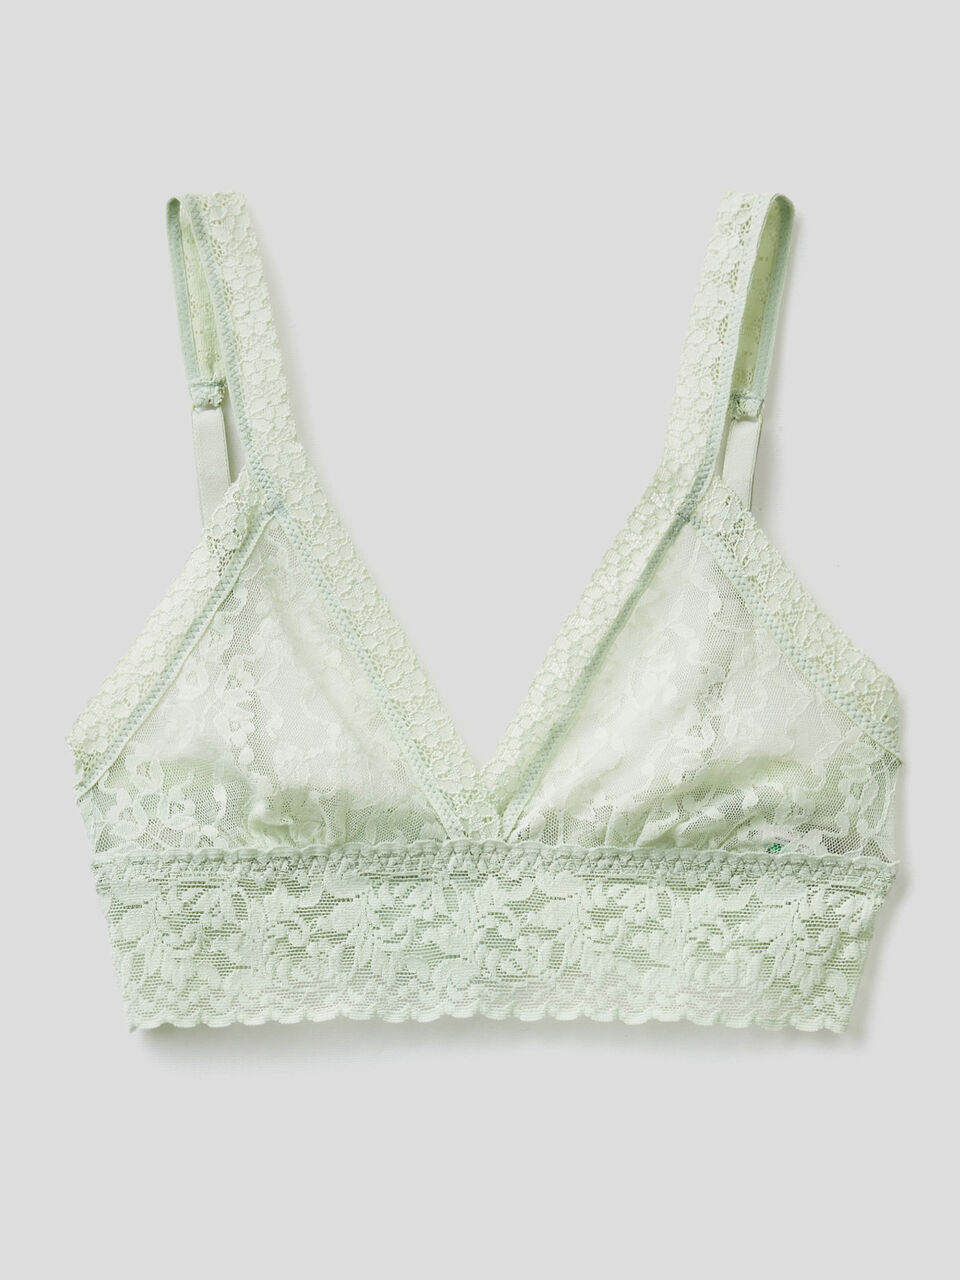 Bralette in sustainable stretch lace - Soft Pink